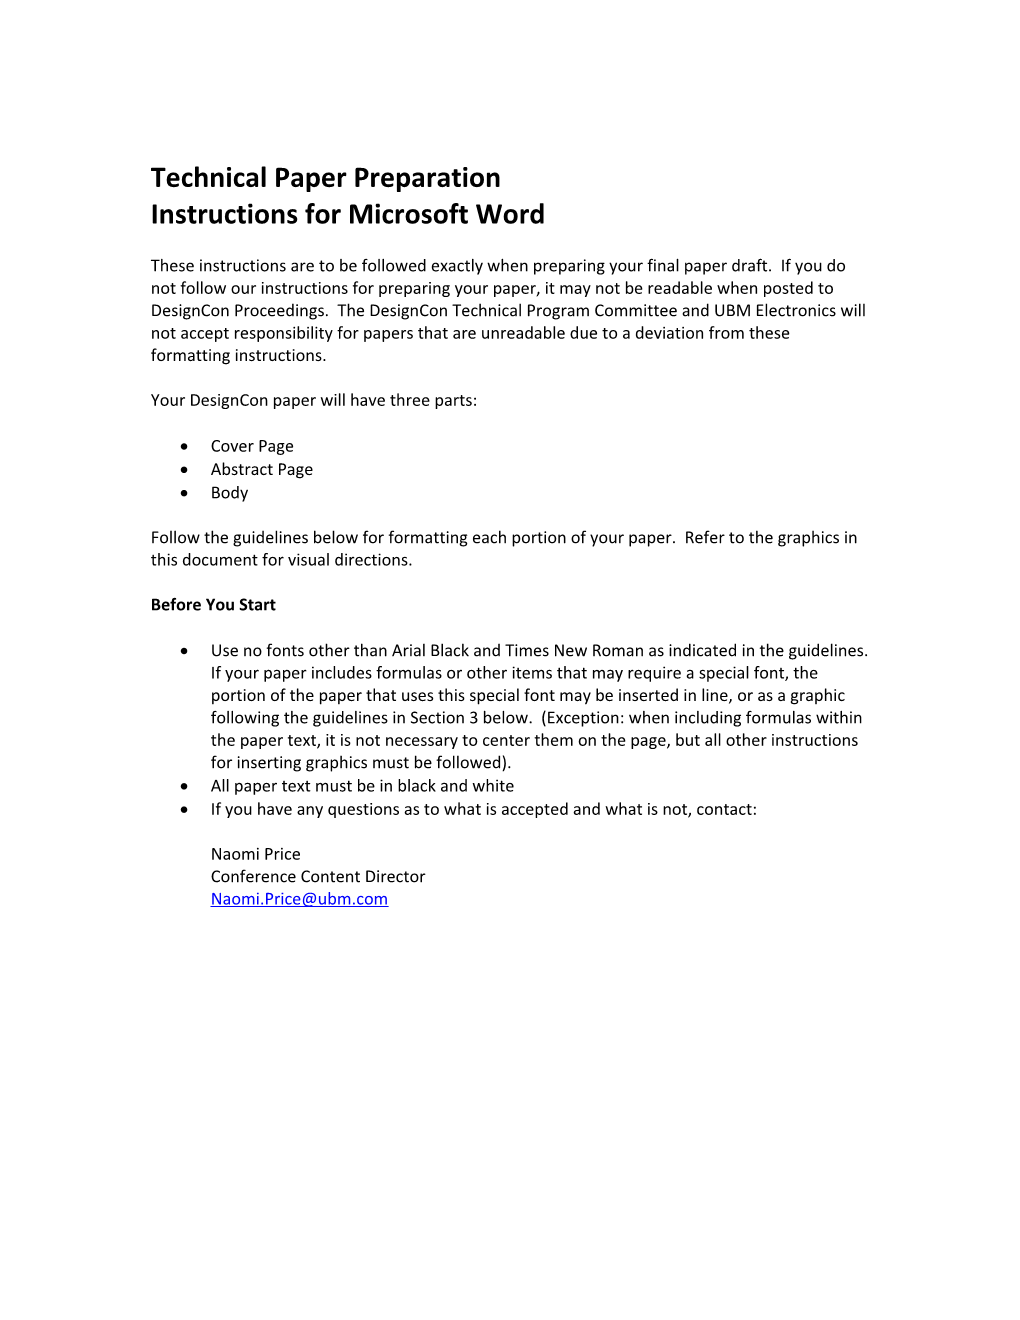 Instructions for Microsoft Word